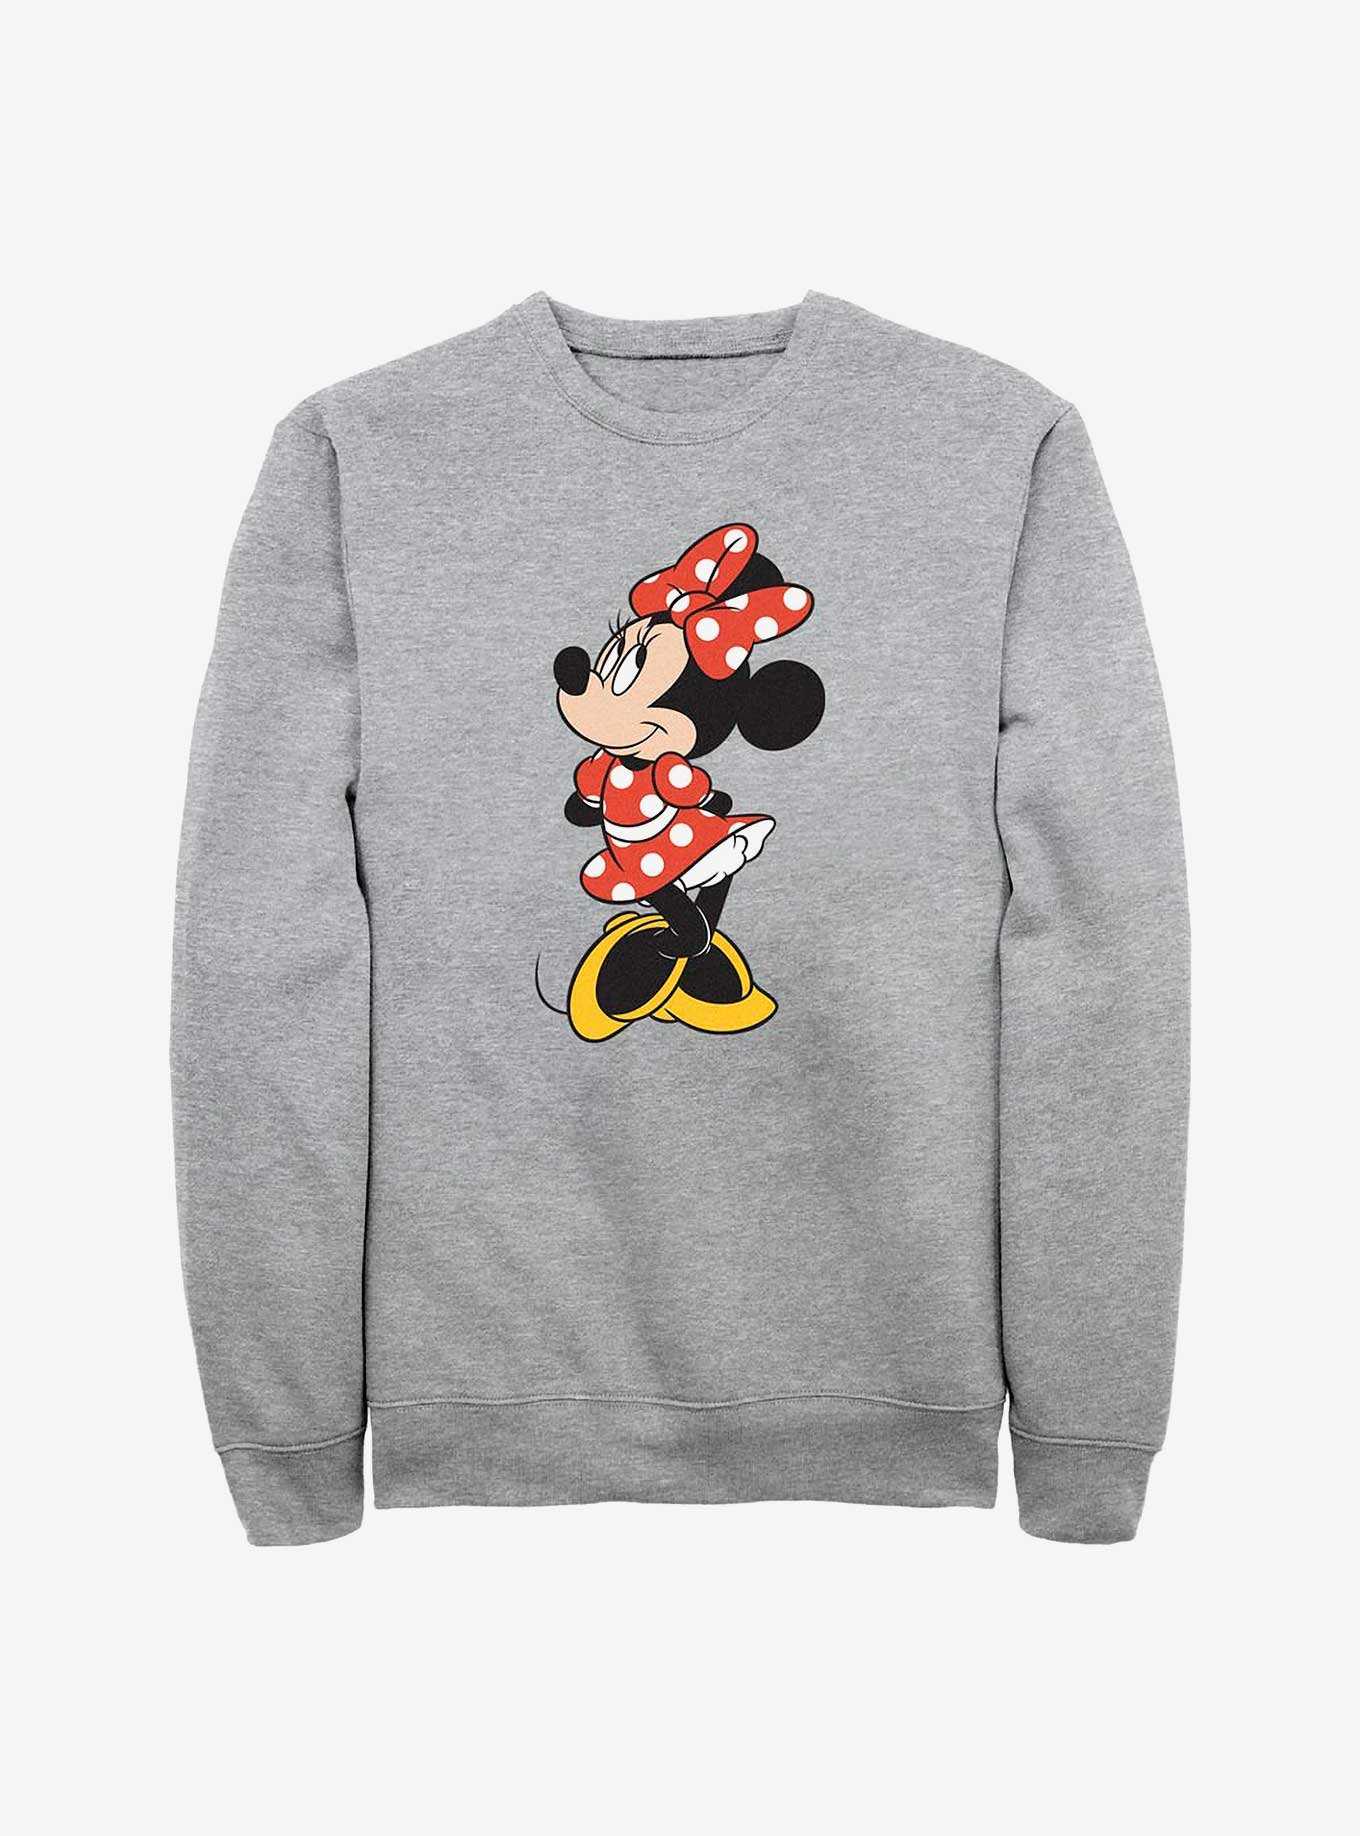 OFFICIAL Minnie Mouse | Hot & Merchandise Shirts Topic